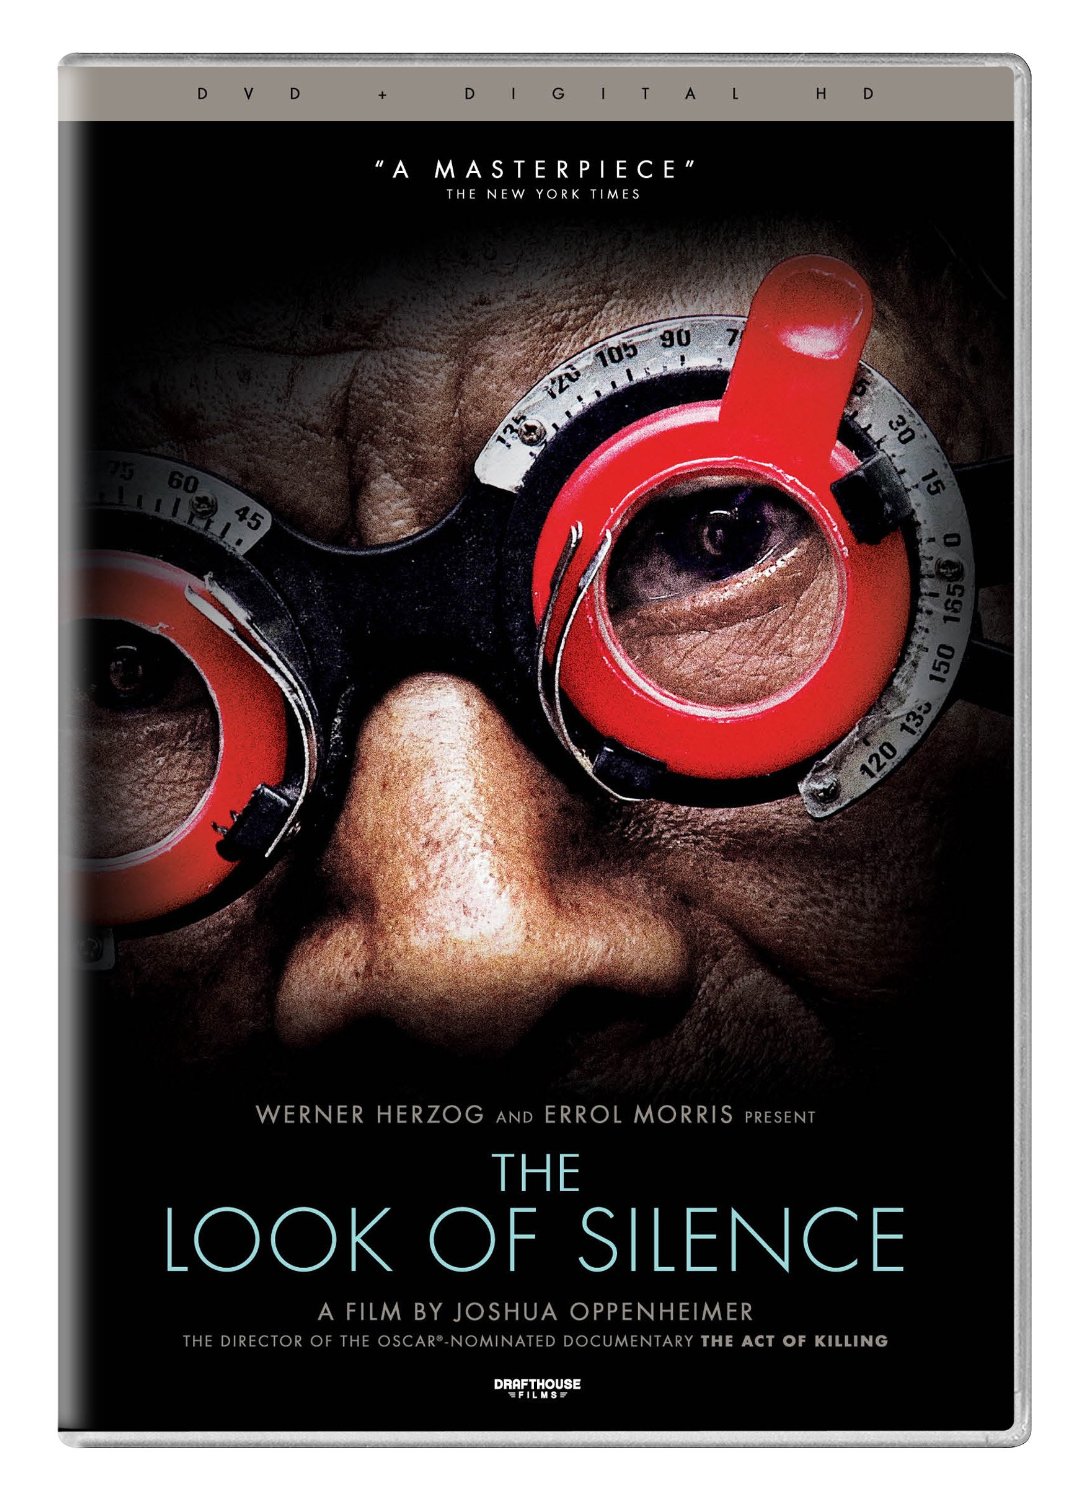 The Look of Silence. 